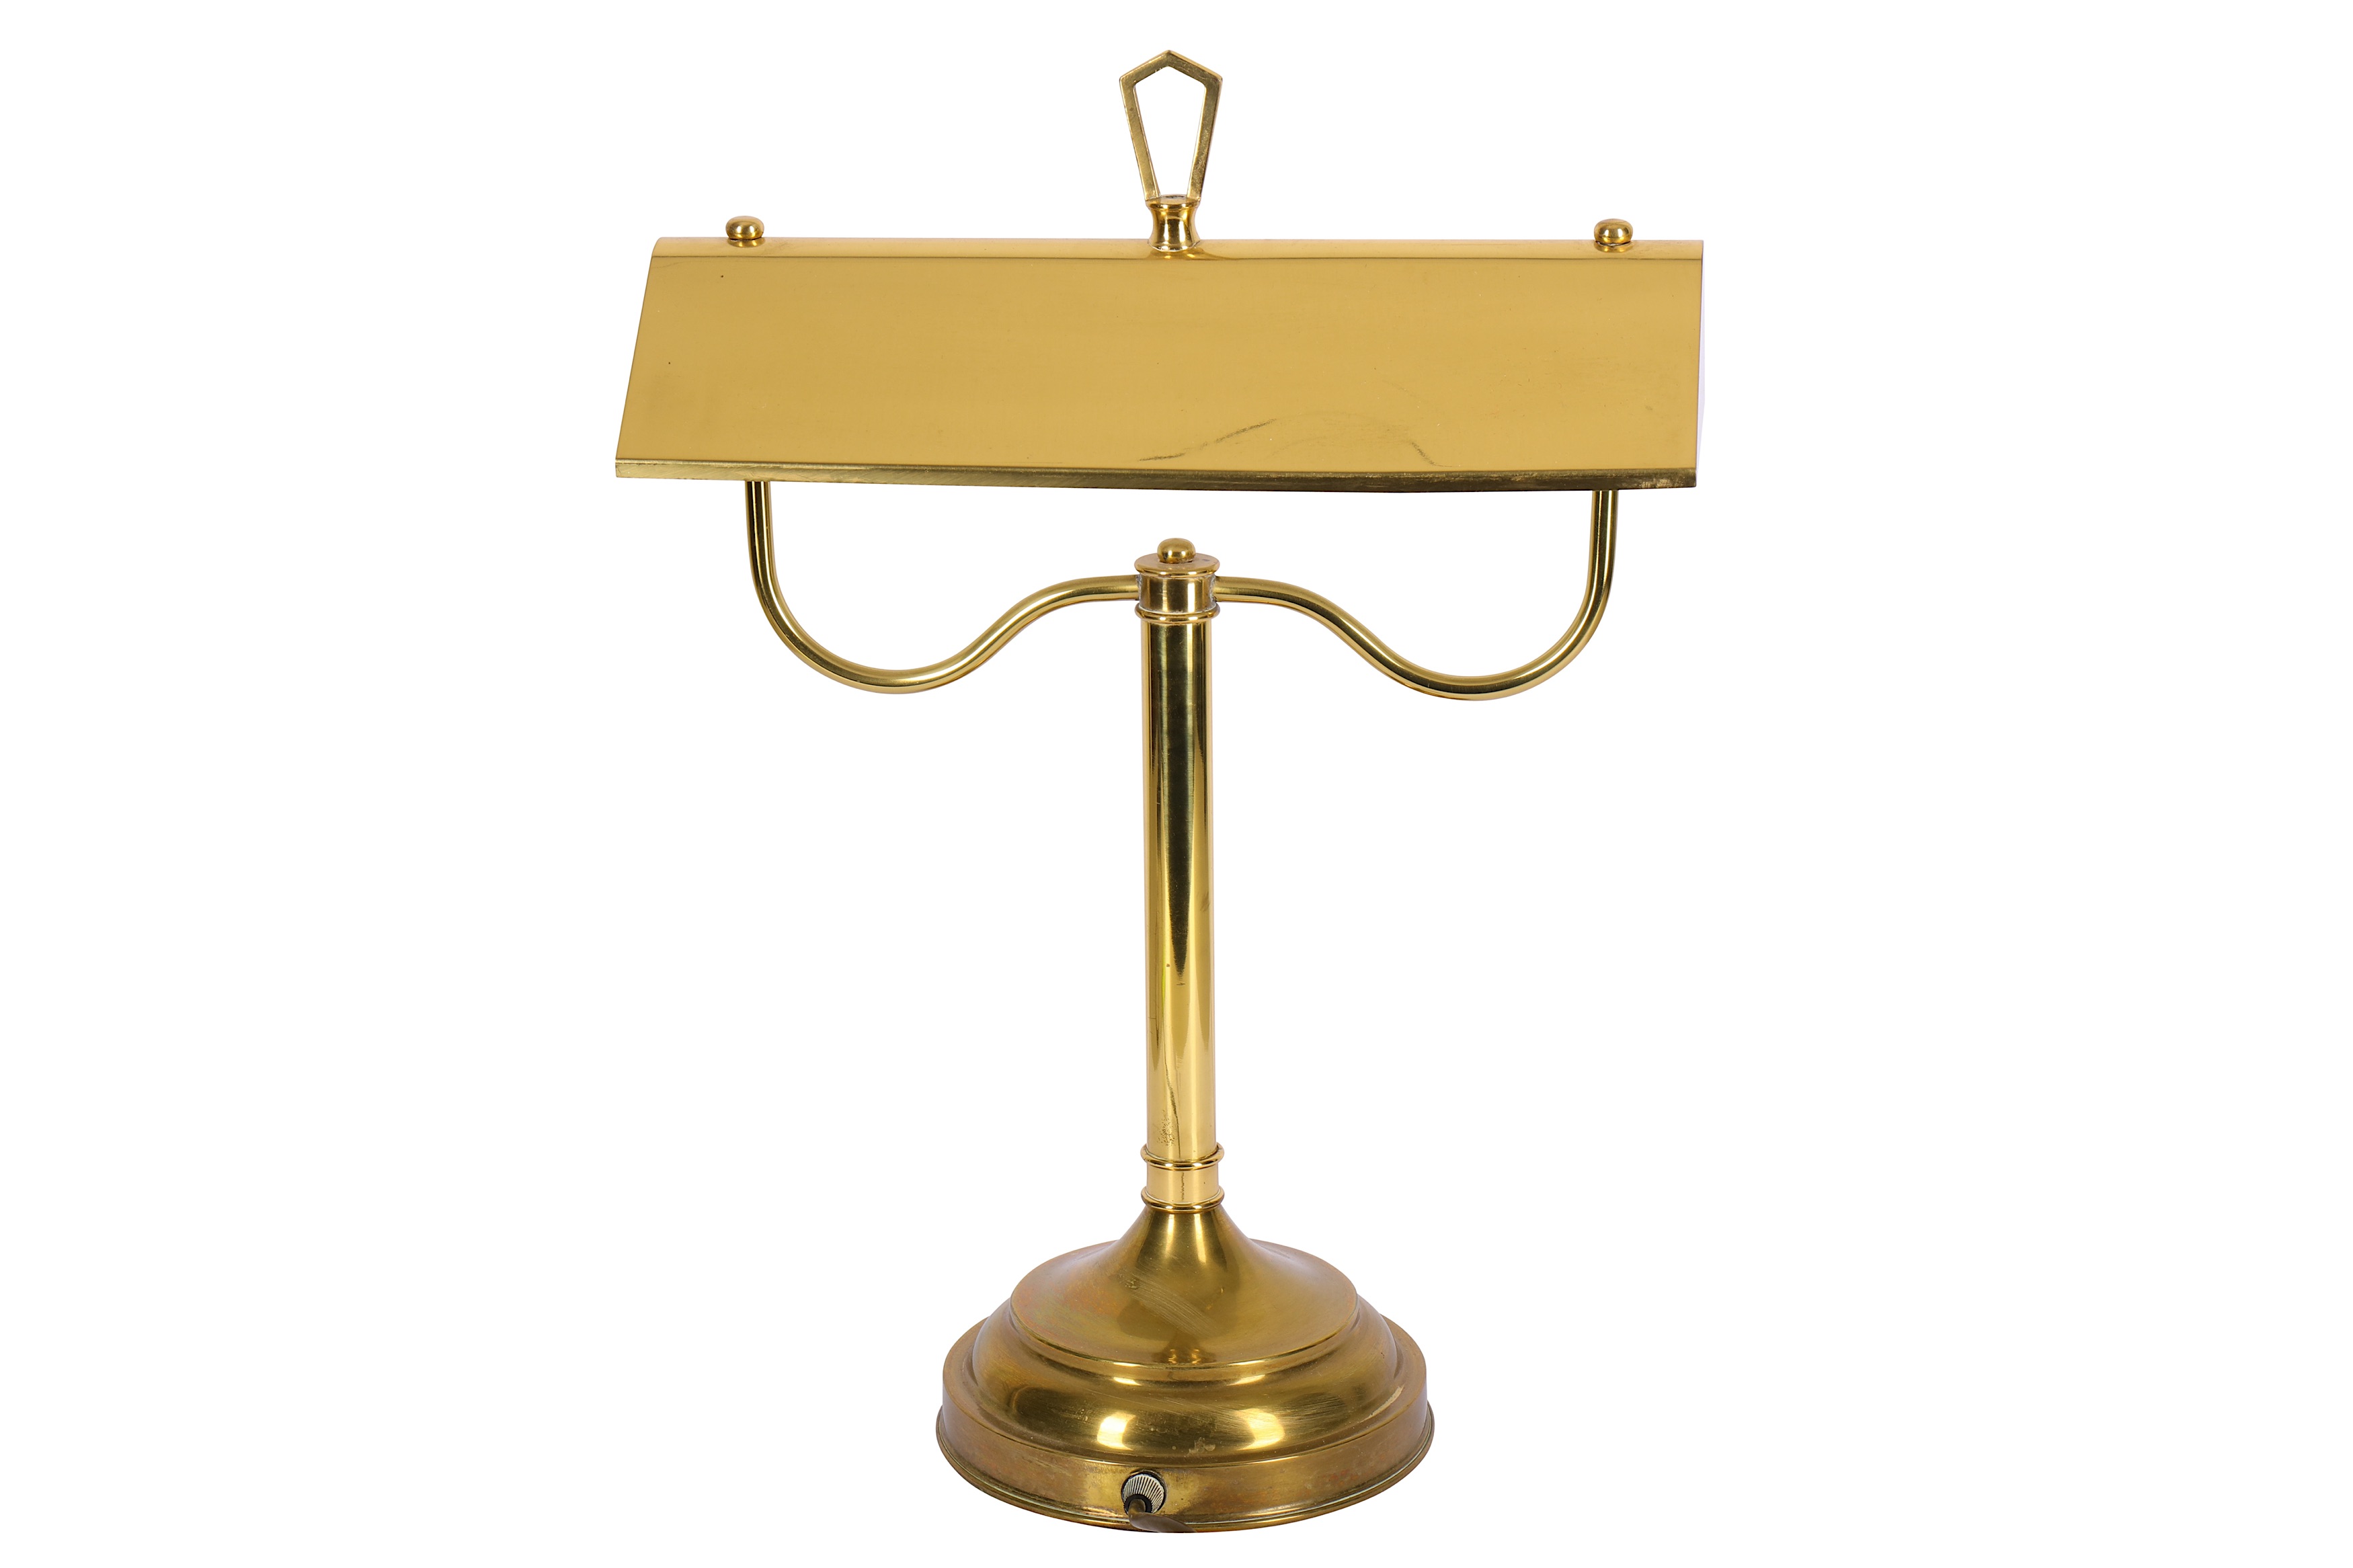 A French Empire style brass desk lamp - Image 2 of 2